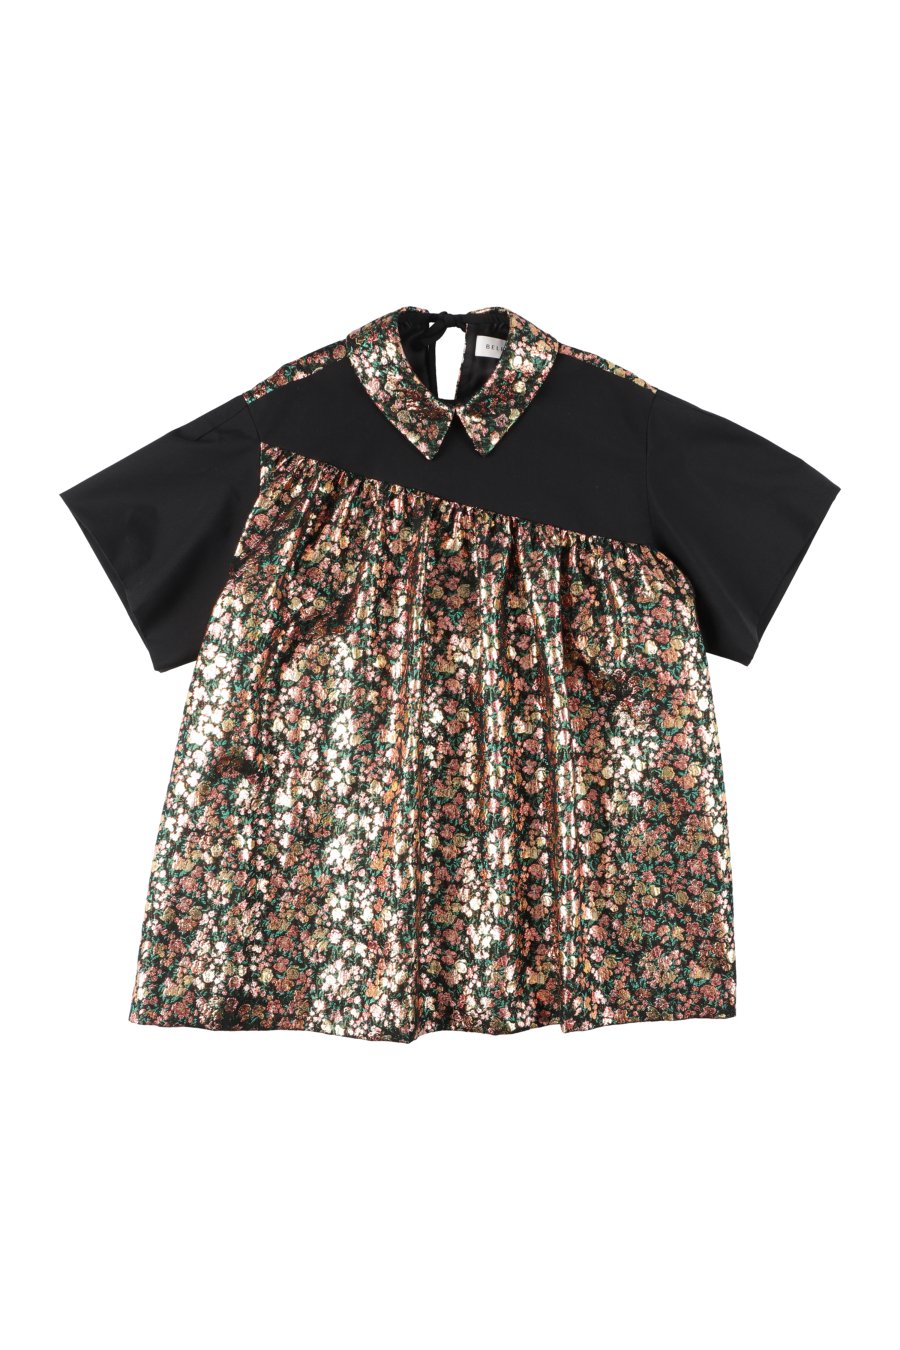 BELPER  SPARKLY SHORT DRESS<img class='new_mark_img2' src='https://img.shop-pro.jp/img/new/icons15.gif' style='border:none;display:inline;margin:0px;padding:0px;width:auto;' />